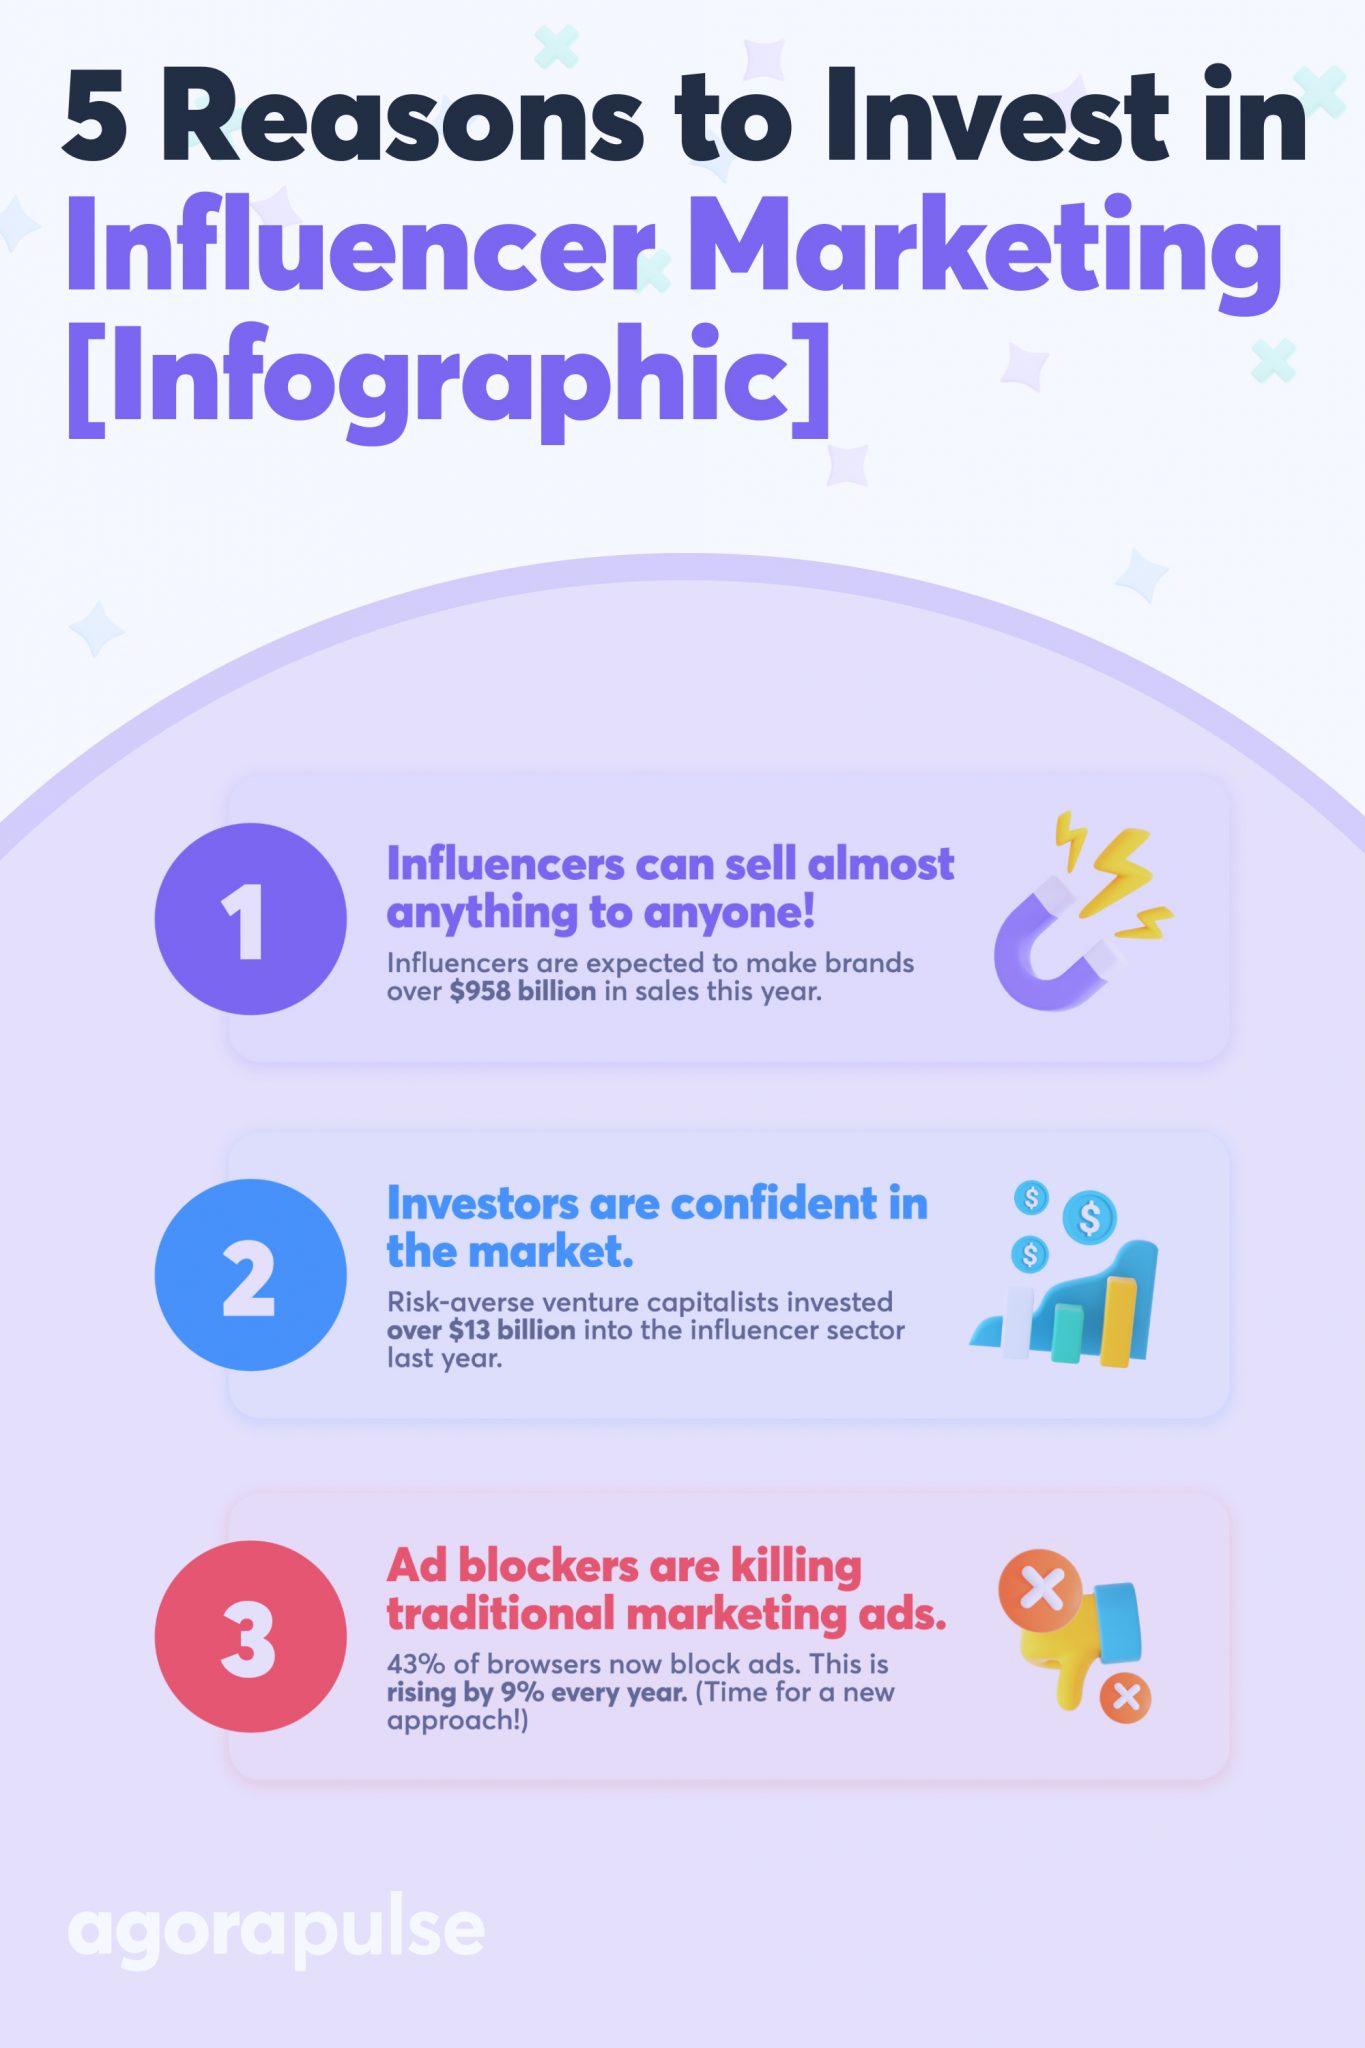 Infographic: 5 Reasons You Should Invest Right Now in Influencer Marketing